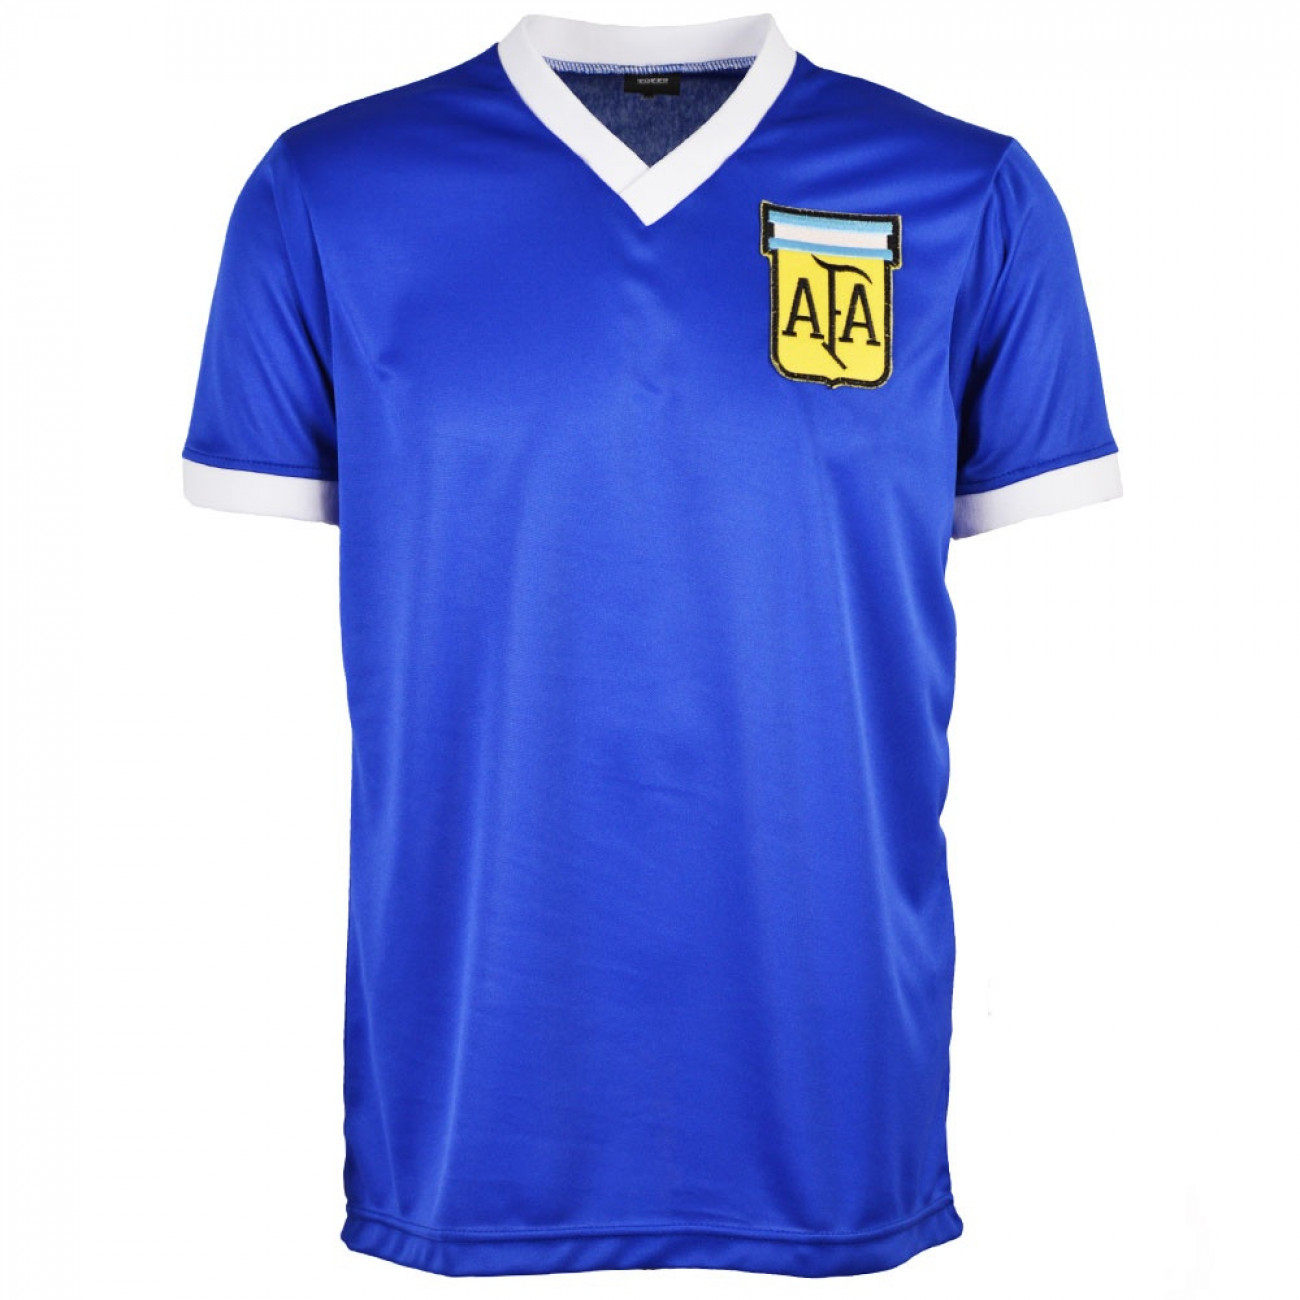 Argentina 1986 Retro Home Soccer Short Sleeve Jersey - Size S